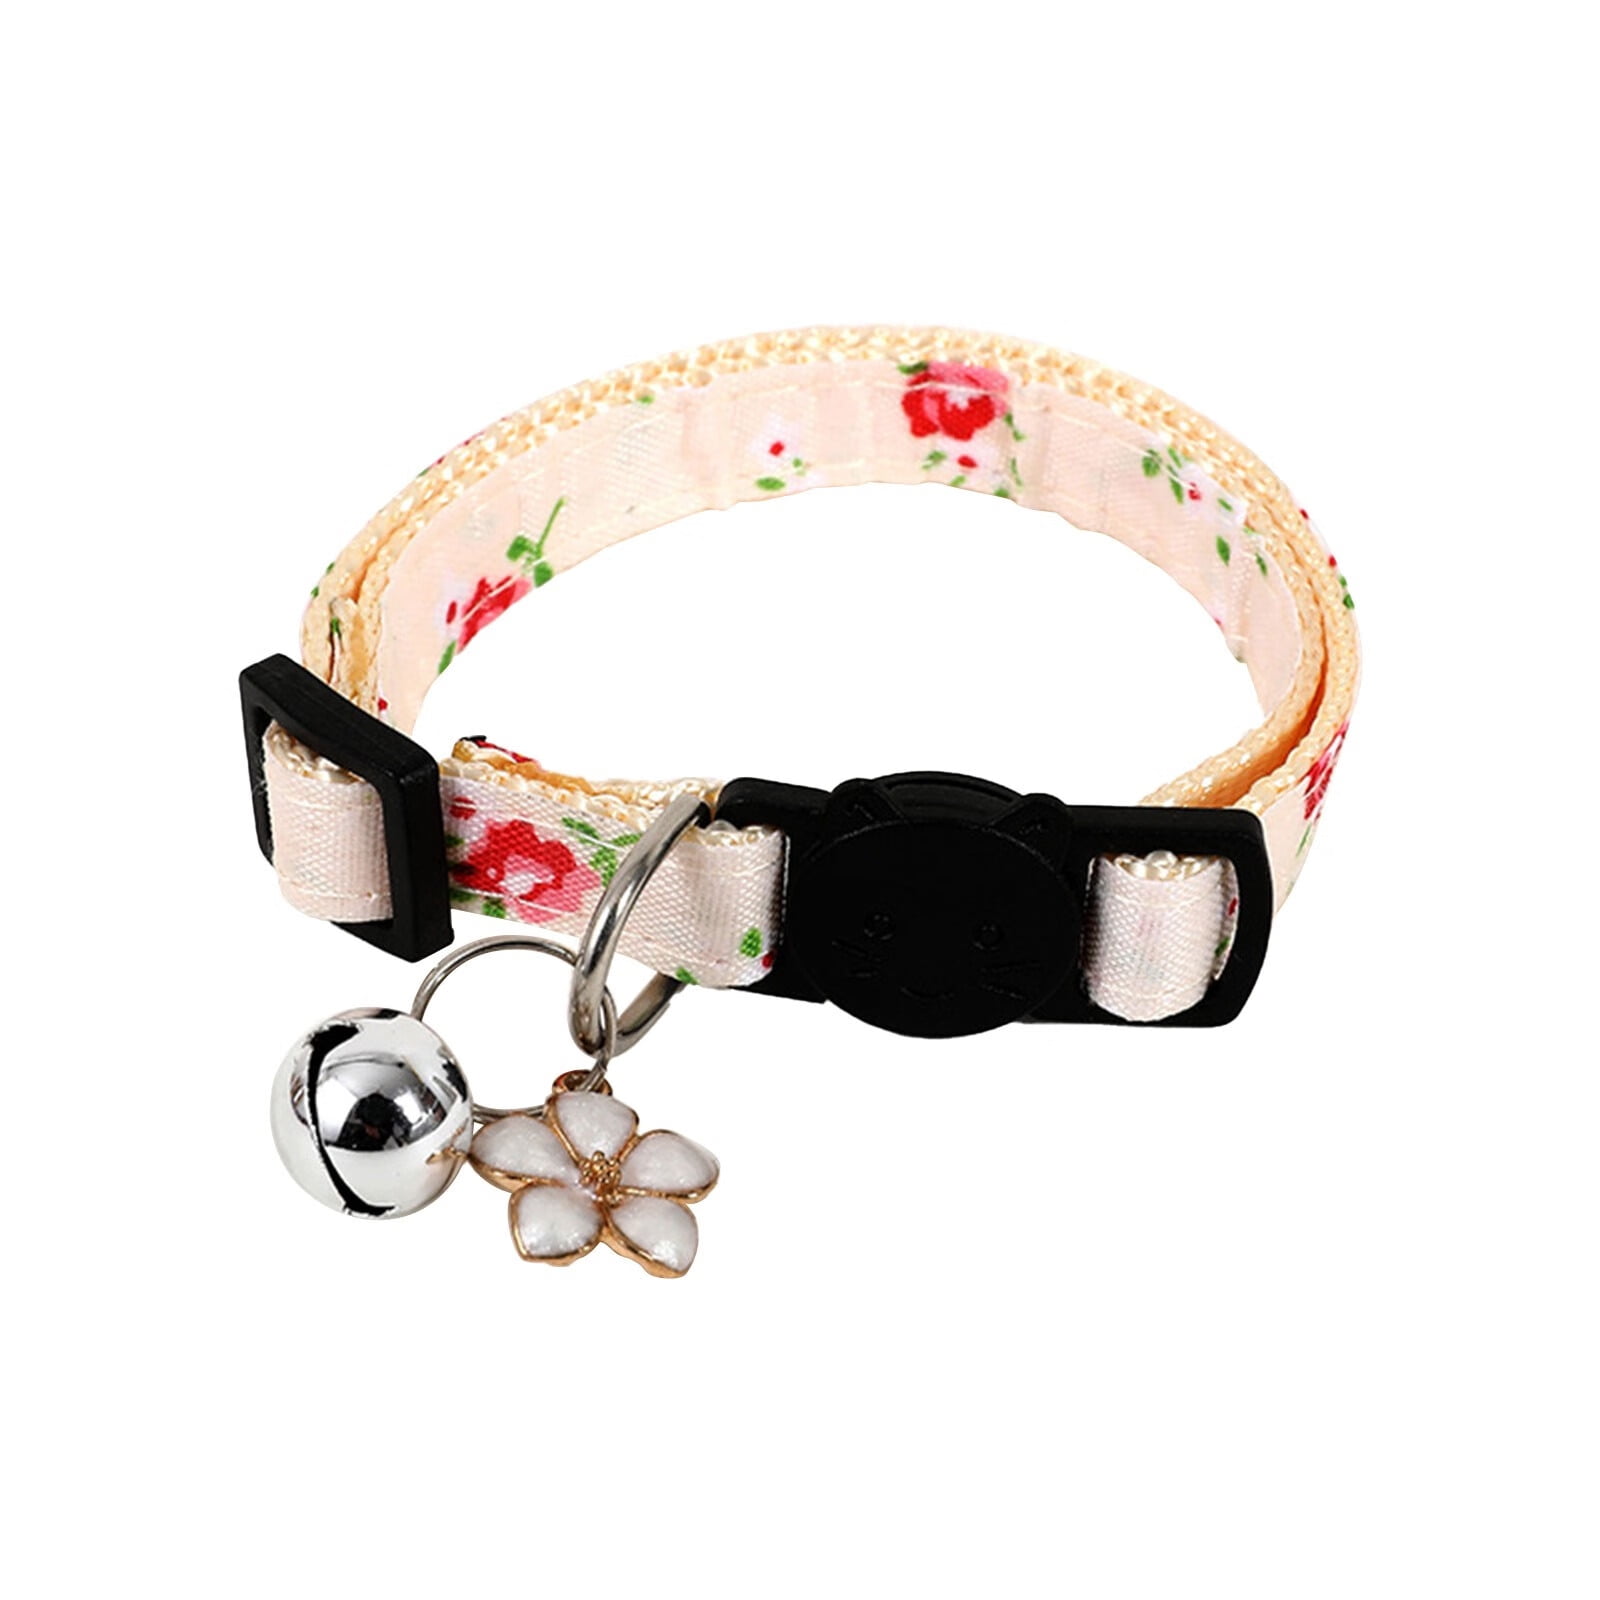 BUBABOX 4 Pcs Girl Puppy Collar Leash Set for Small(S), Adjustable Dog Cat  Floral Cotton Collar 10*17 in with Quick Release Metal Buckle, Breakaway